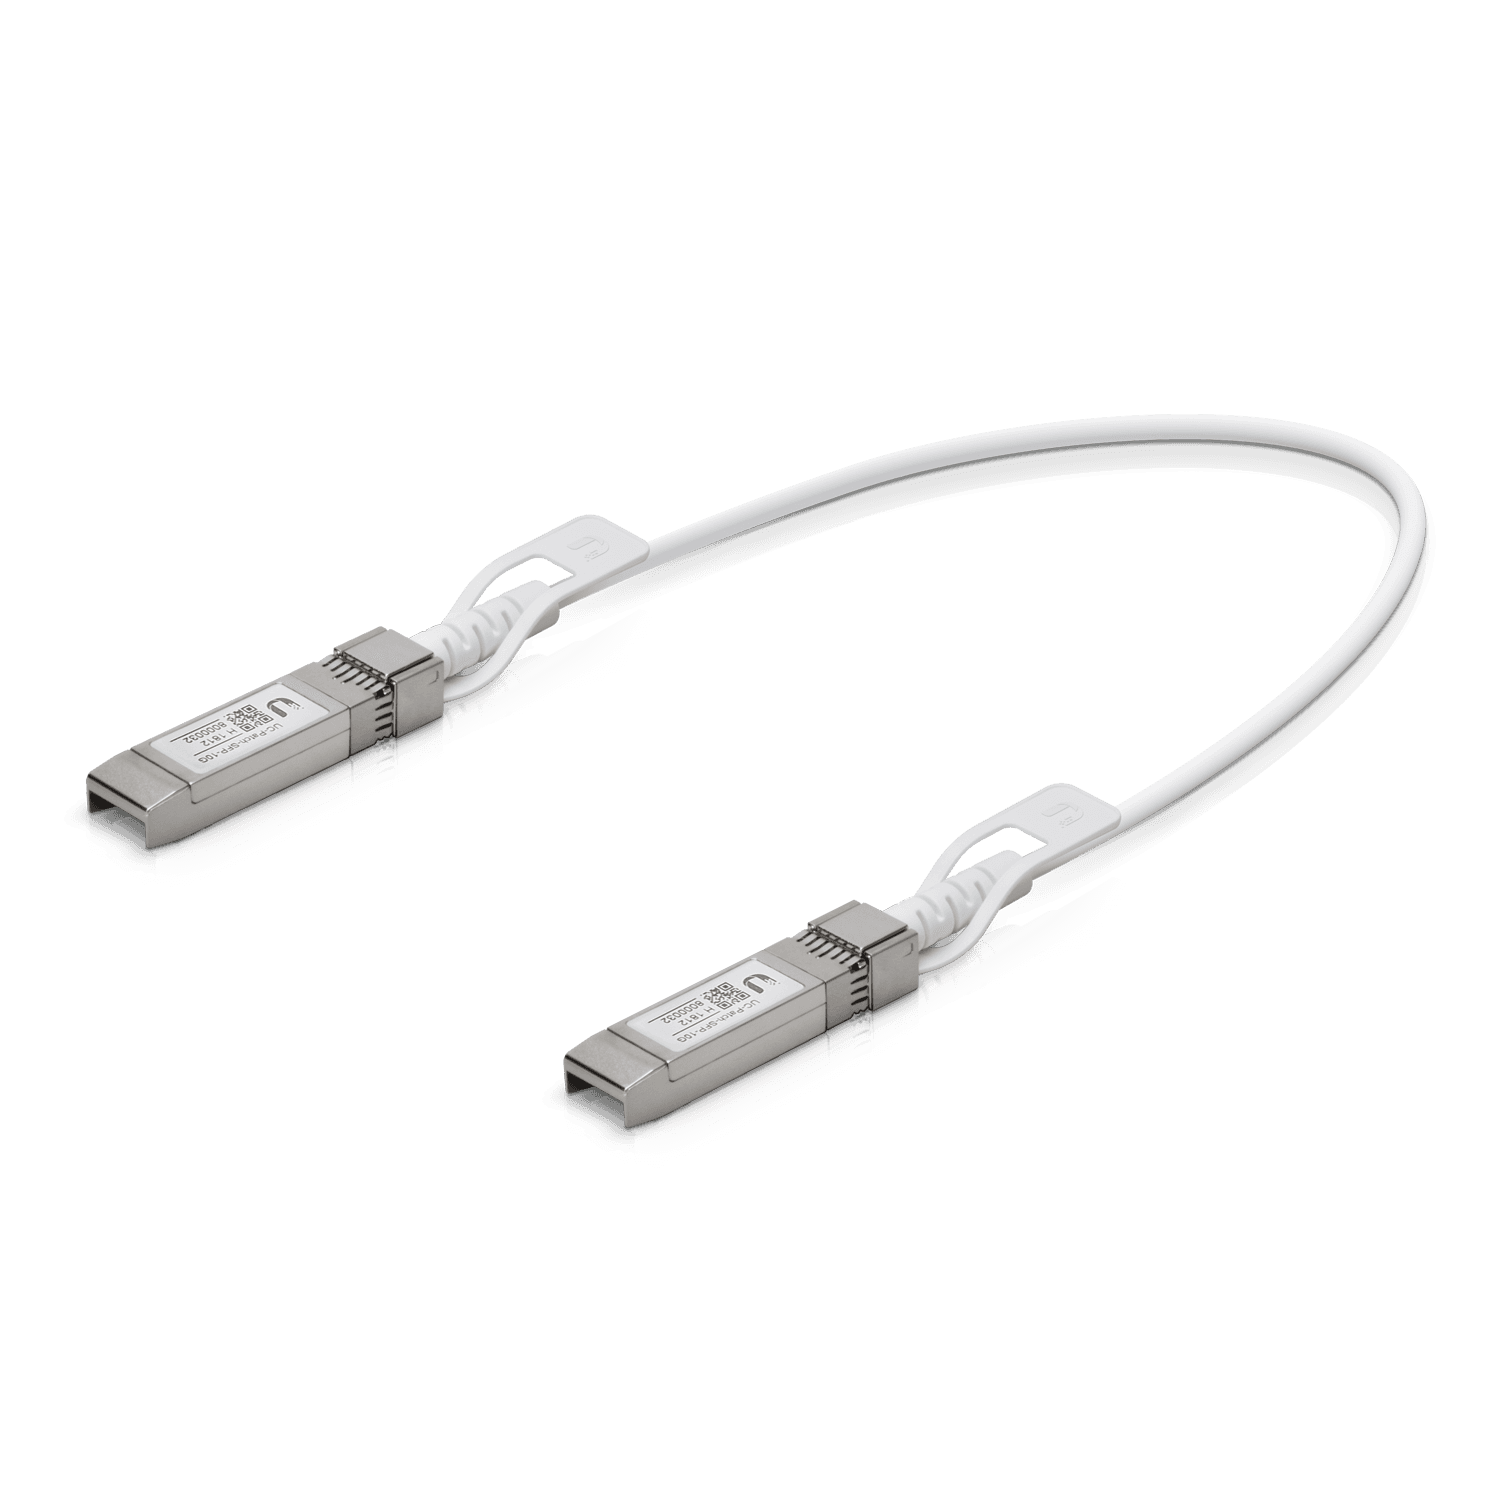 Direct Attach Copper Cable, SFP+, 10Gbps, 0.5 meter